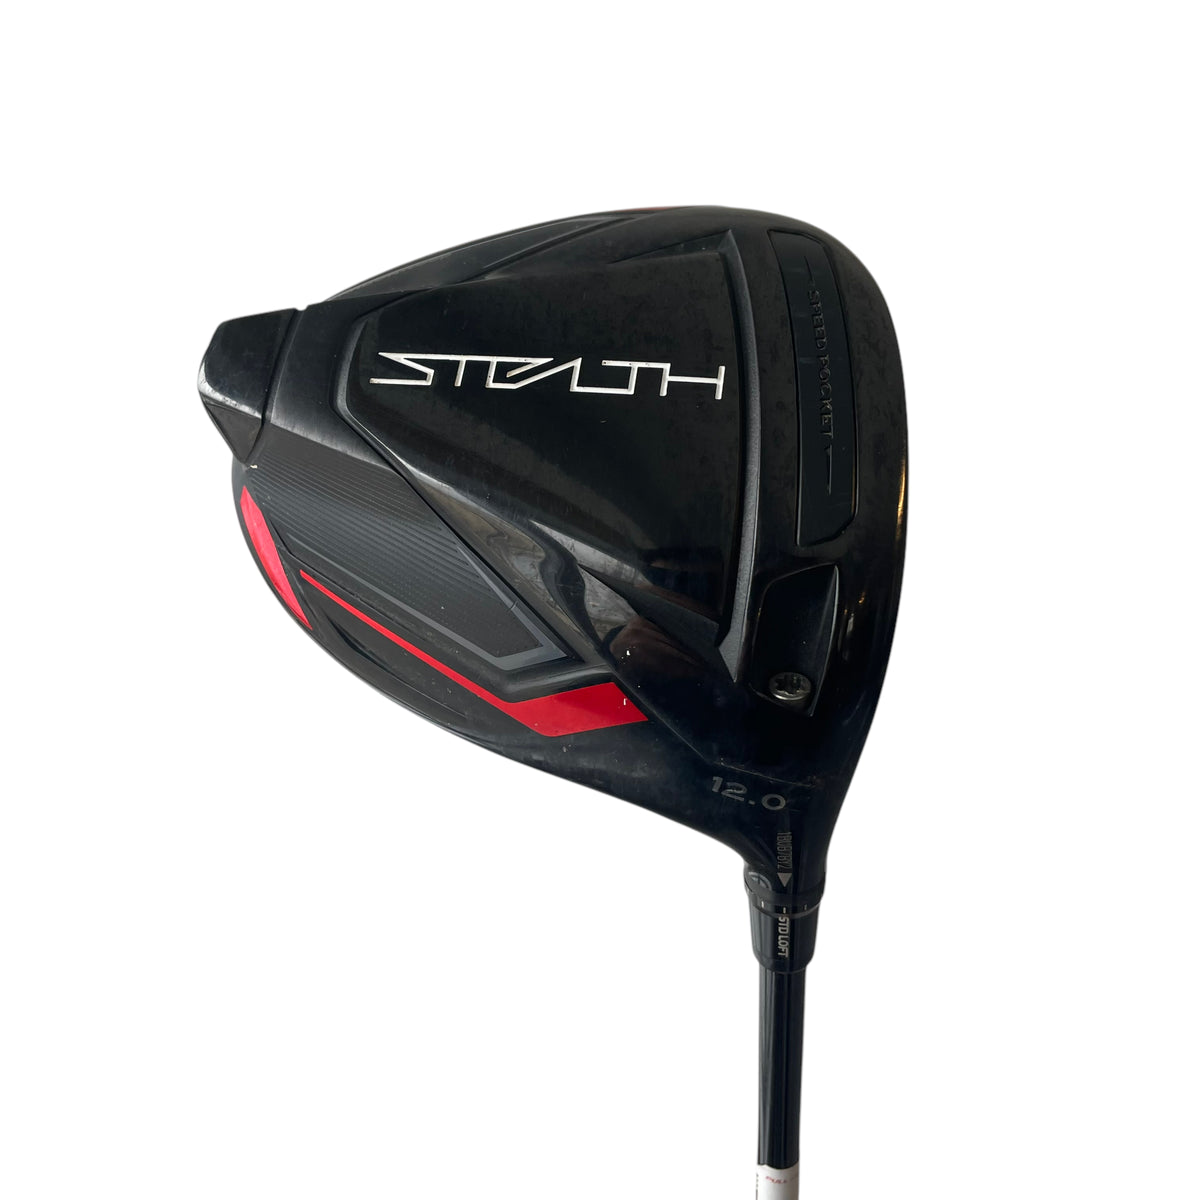 TaylorMade Stealth Driver - Used Driver Taylormade Right Senior / 12.0 VENTUS RED 5